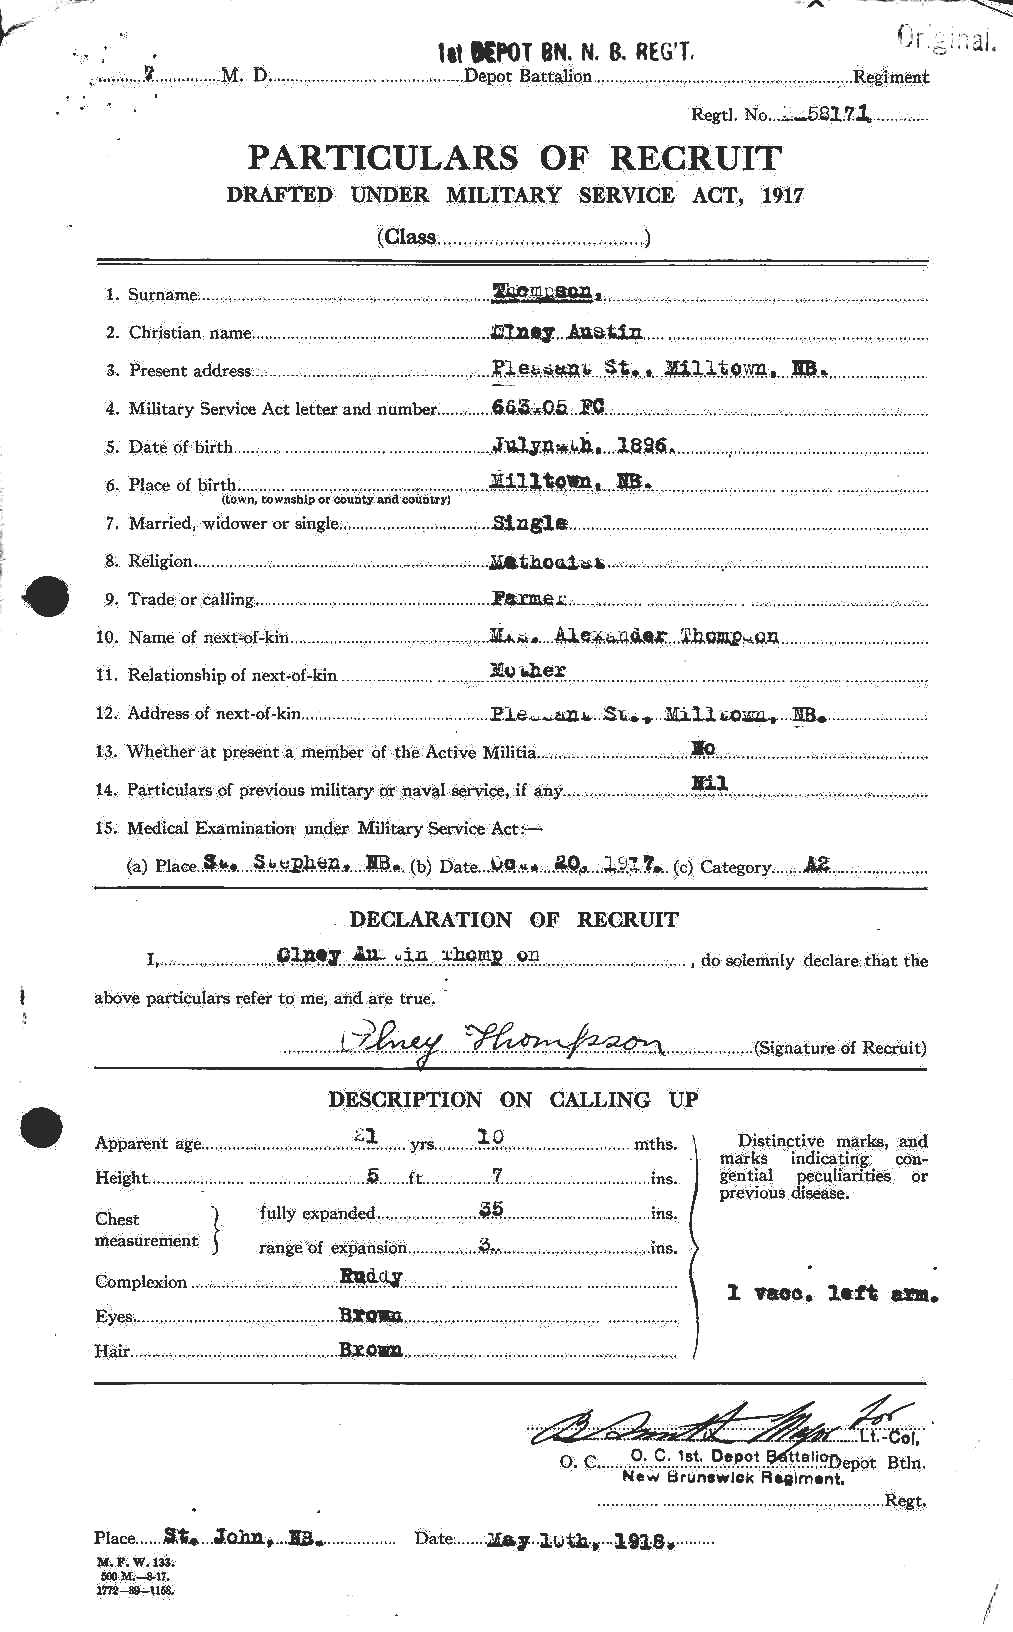 Personnel Records of the First World War - CEF 630766a